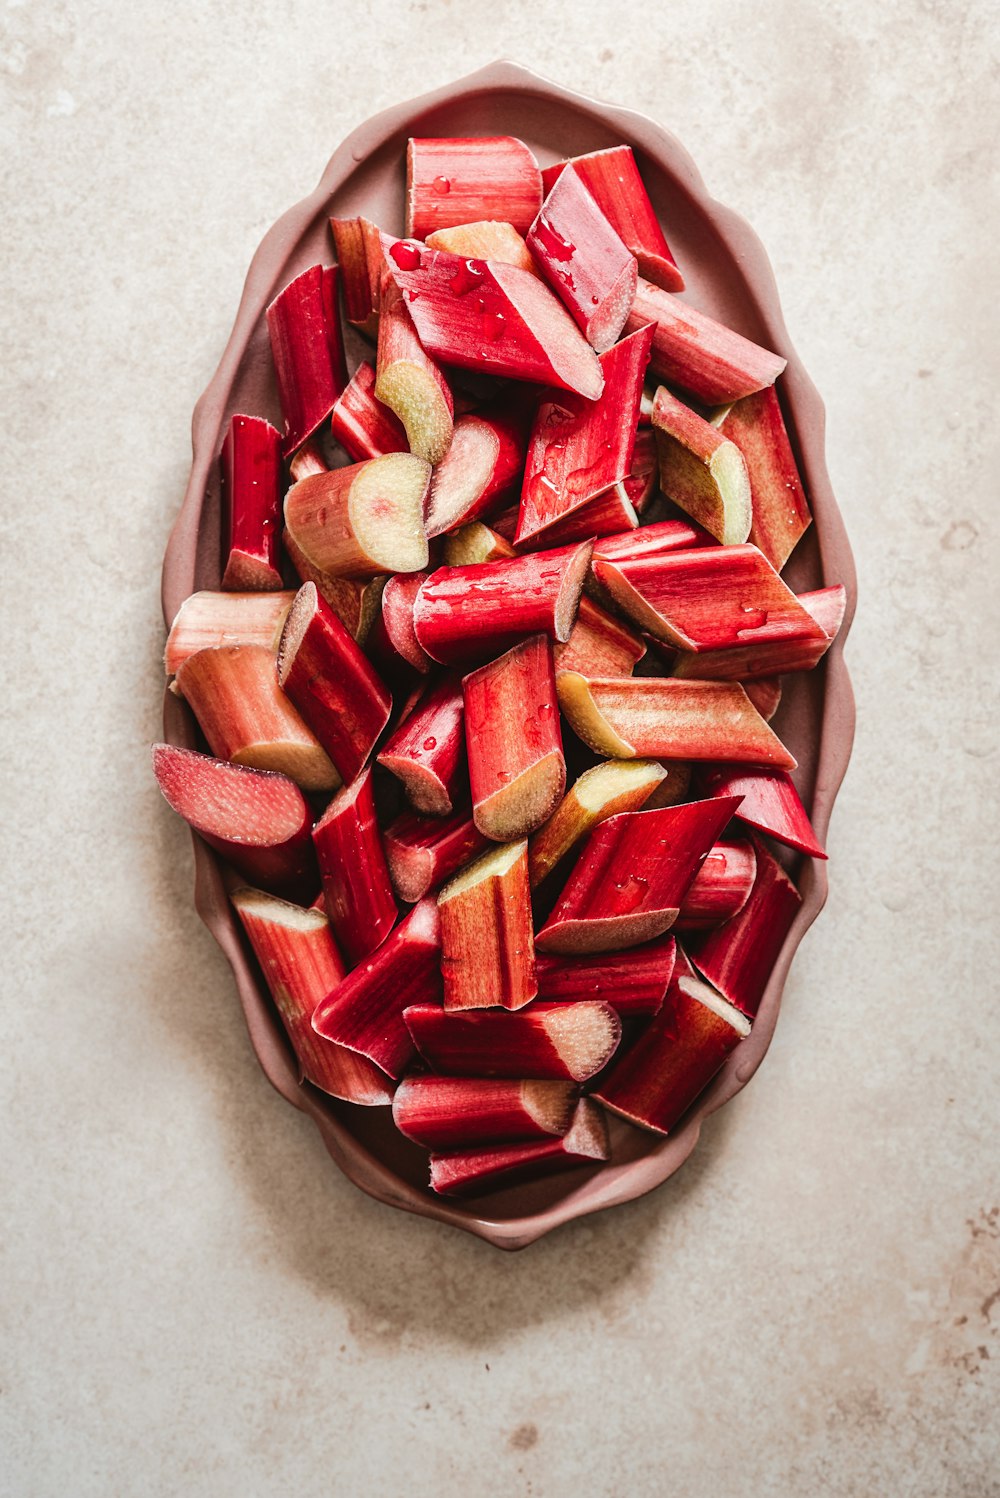 a bowl filled with sliced up rhubaras on top of a table